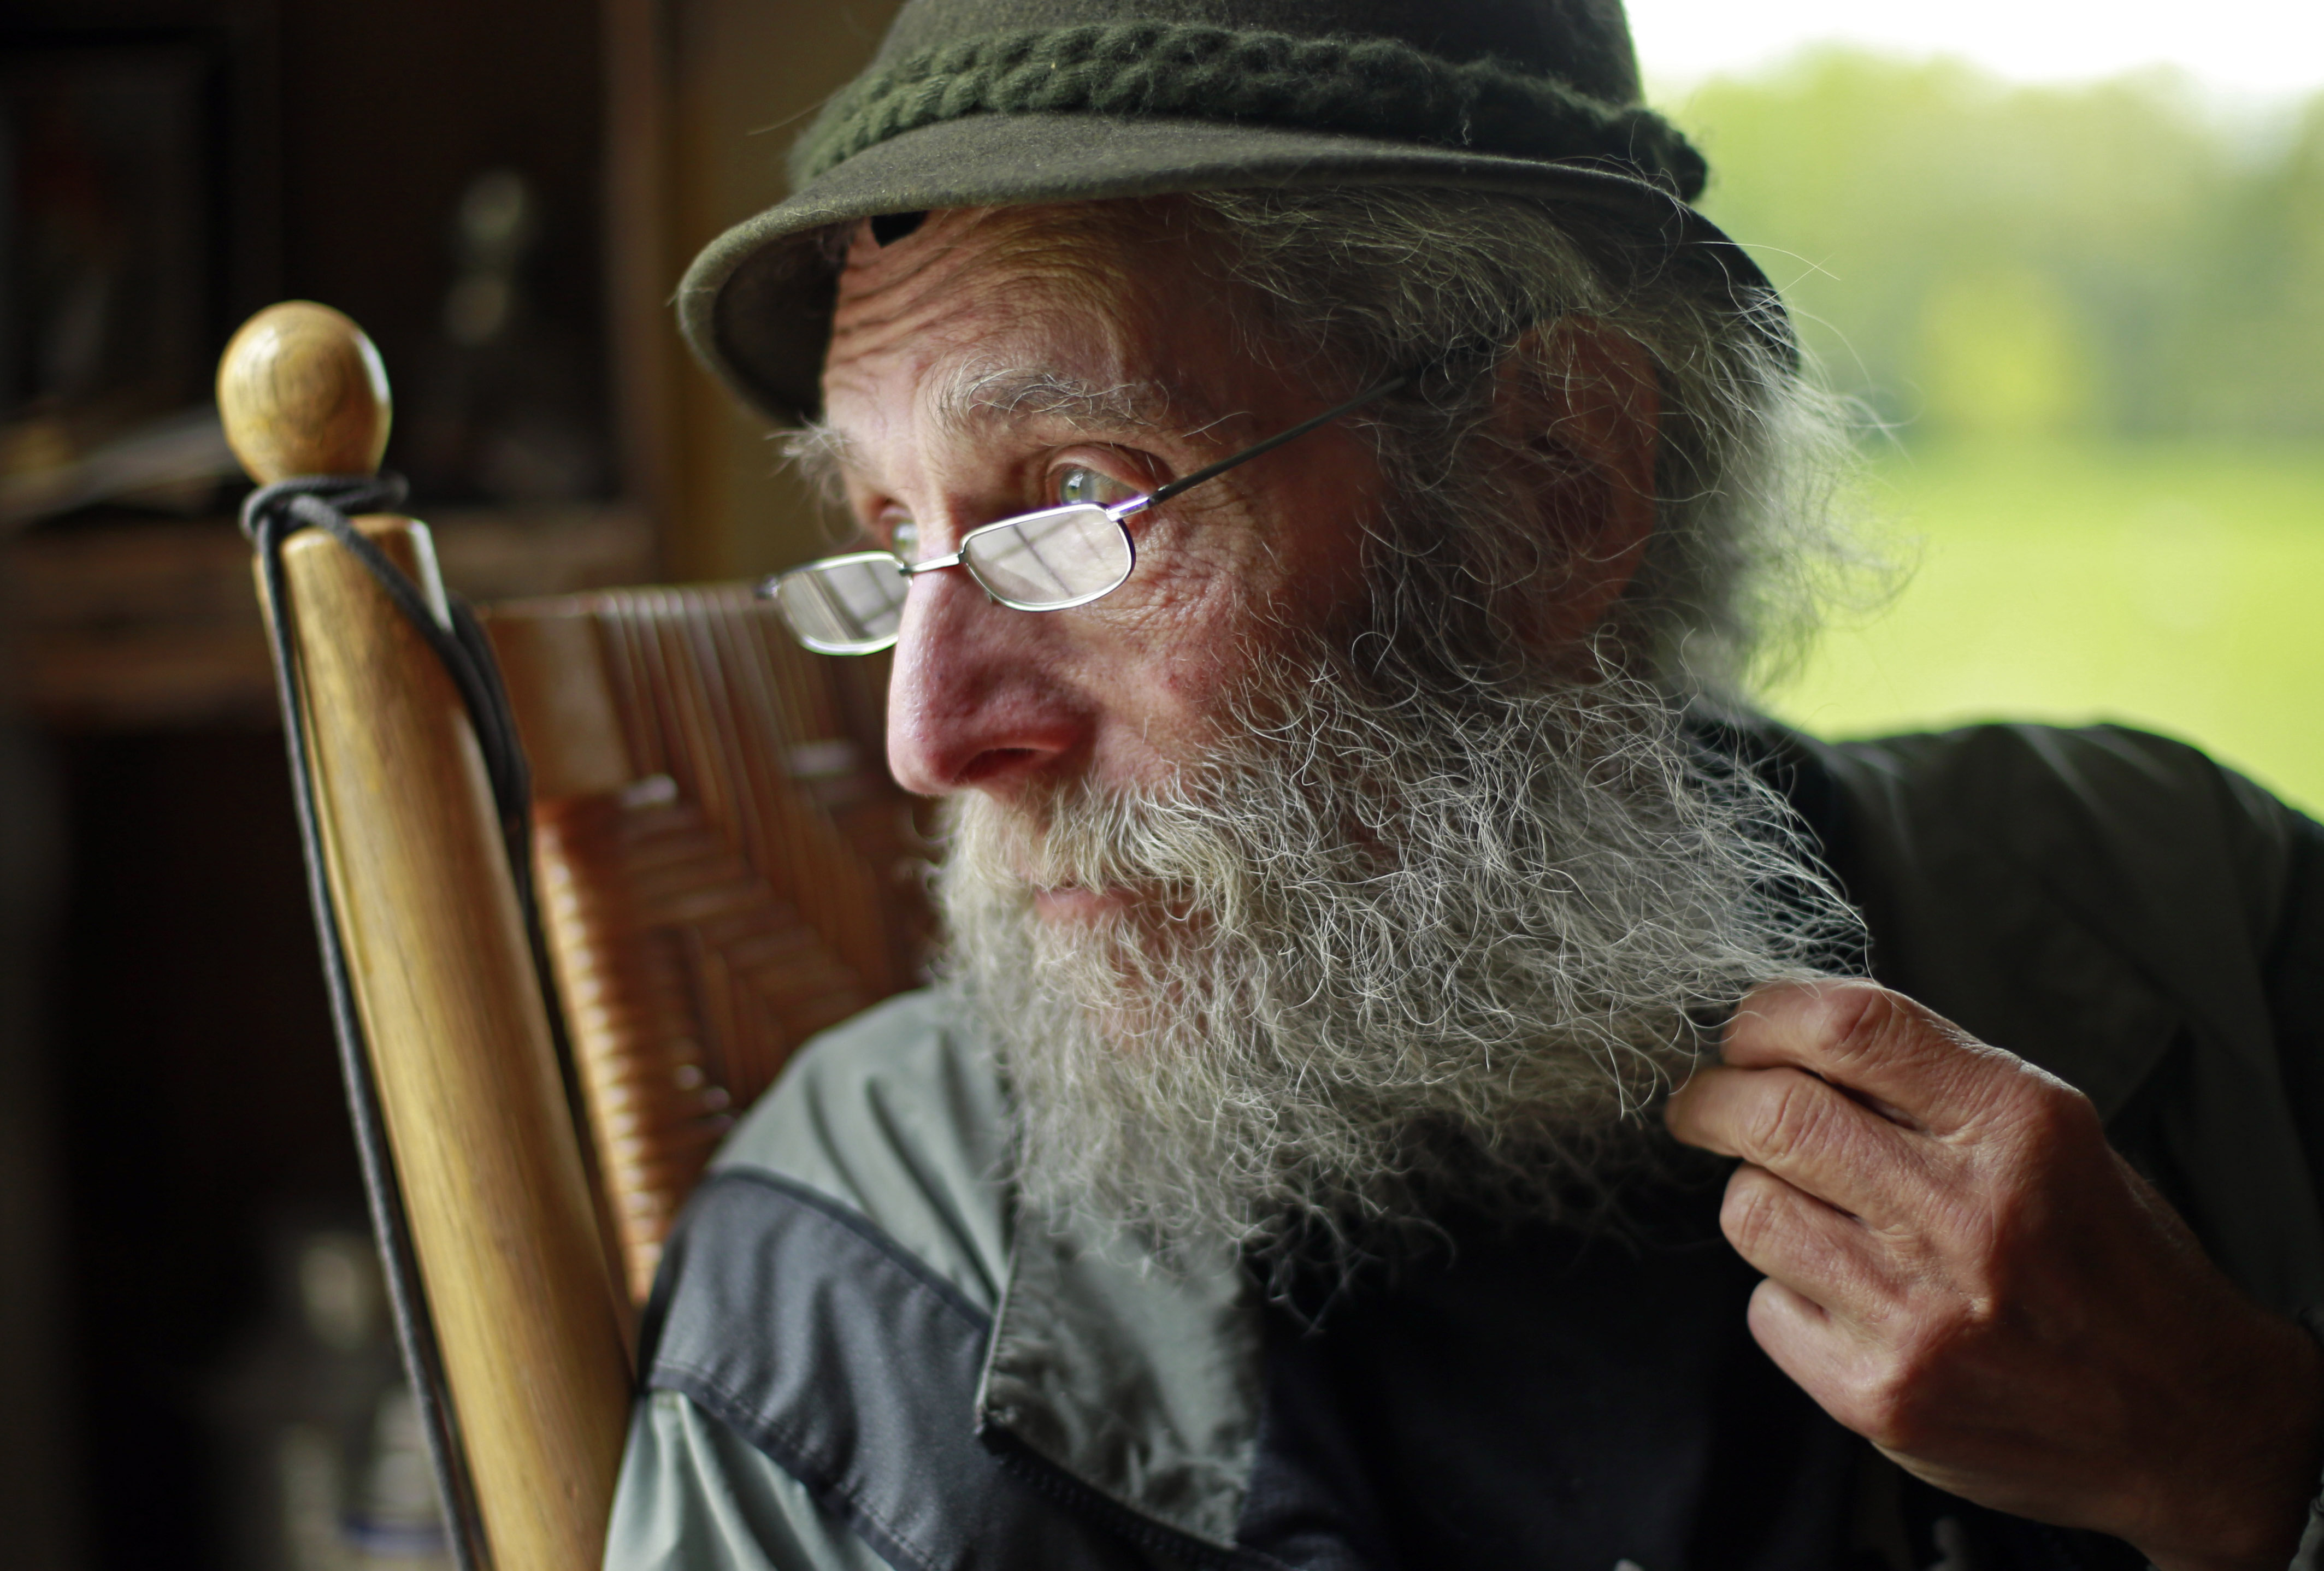  In a May 23, 2014, file photo, Burt Shavitz pauses during an interview to watch a litter of fox kits play near his camp in Parkman, Maine. Shavitz, a former beekeeper, is the Burt behind Burt's Bees. A spokeswoman for Burt’s Bees said Shavtiz died Sunday, July 5, 2015, at his home in rural Maine. He was 80. (AP Photo/Robert F. Bukaty, File)